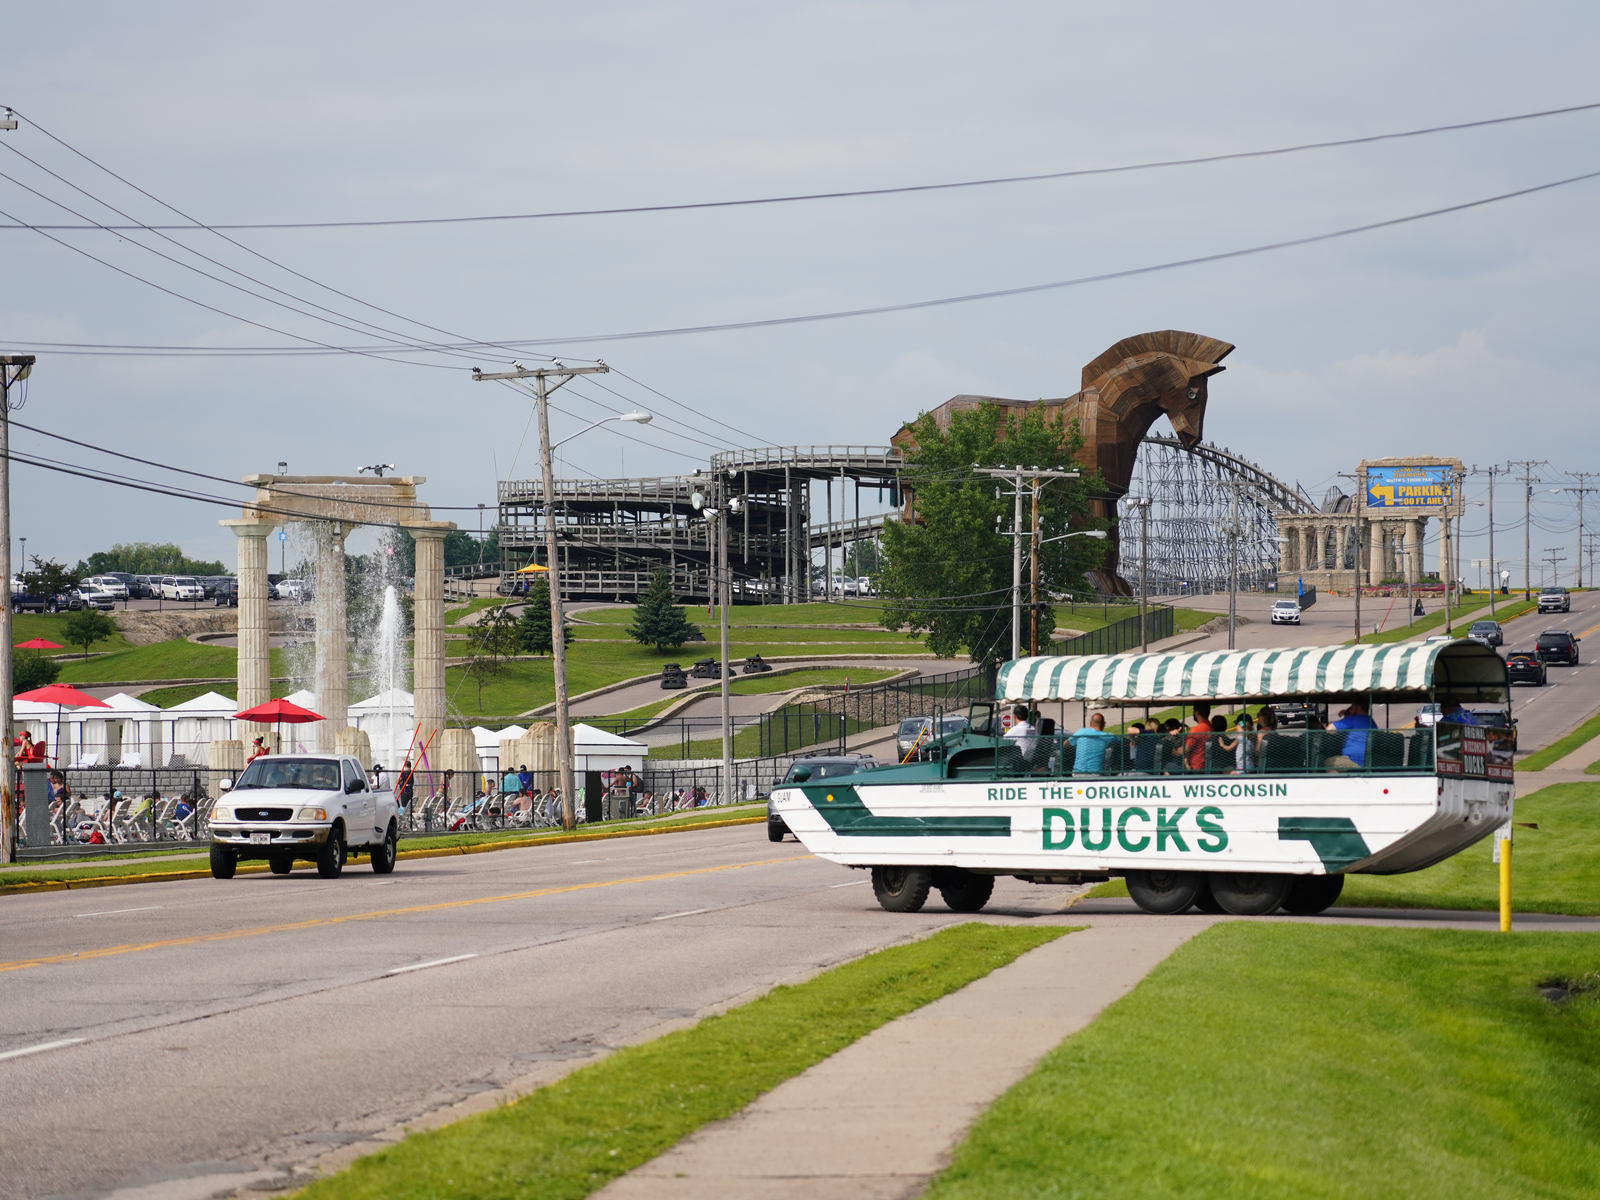 The six-wheel amphibious Wisconsin Ducks, one of the best Wisconsin tourist attractions, filled with passengers and crossing a road with a large trojan horse replica in background